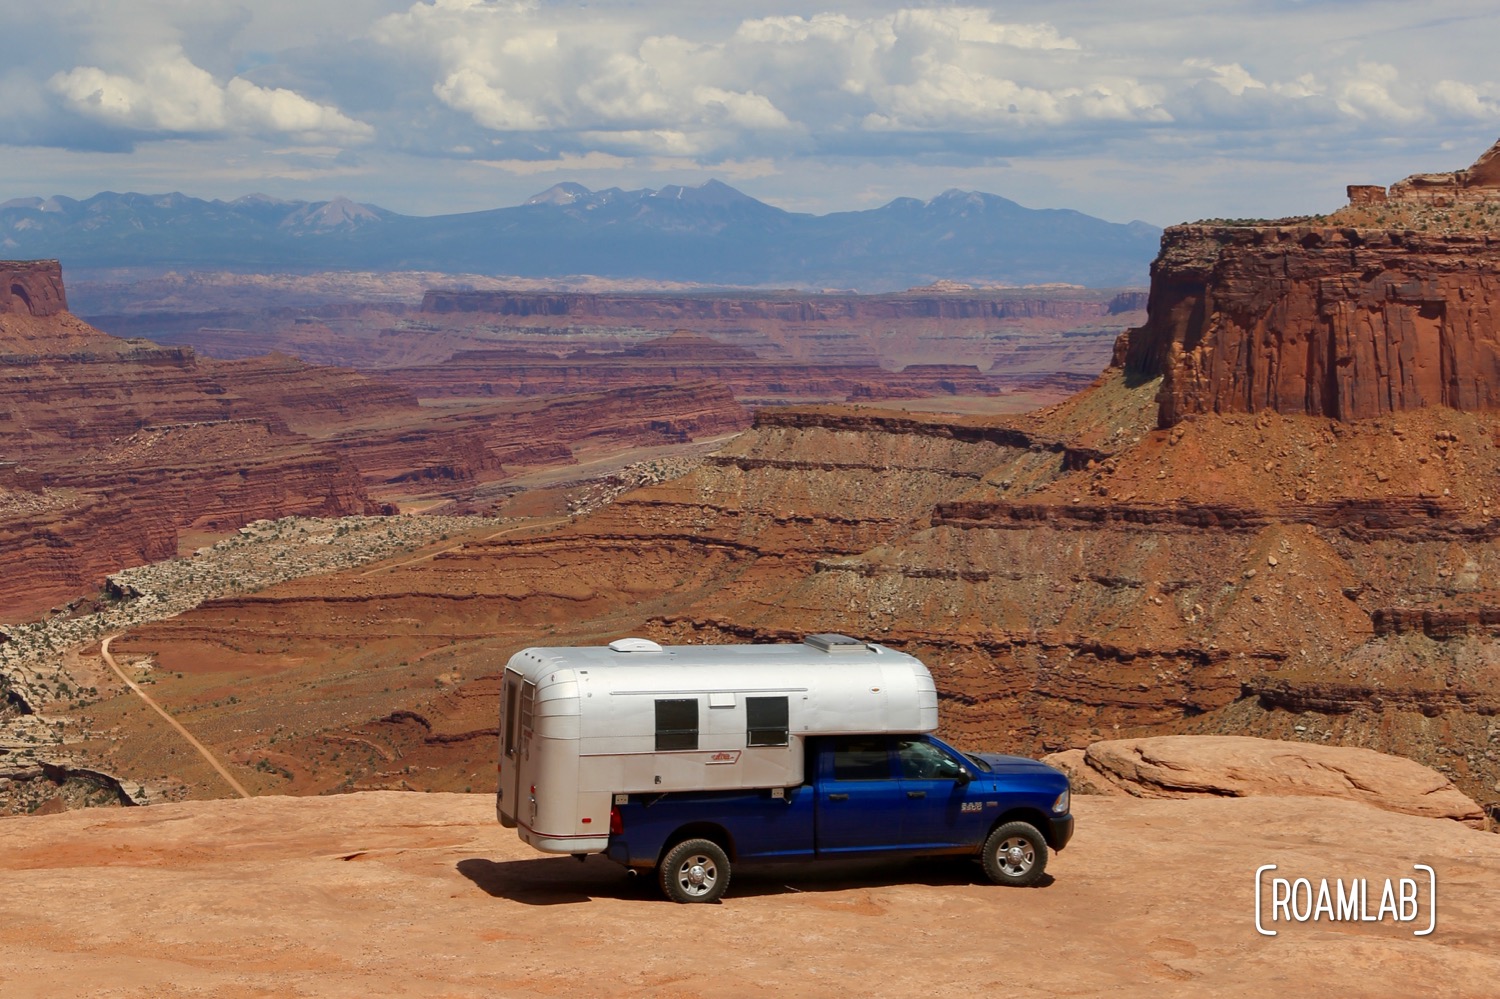 1970 Avion C11 truck camper parked on overlook in Canyonlands National Park